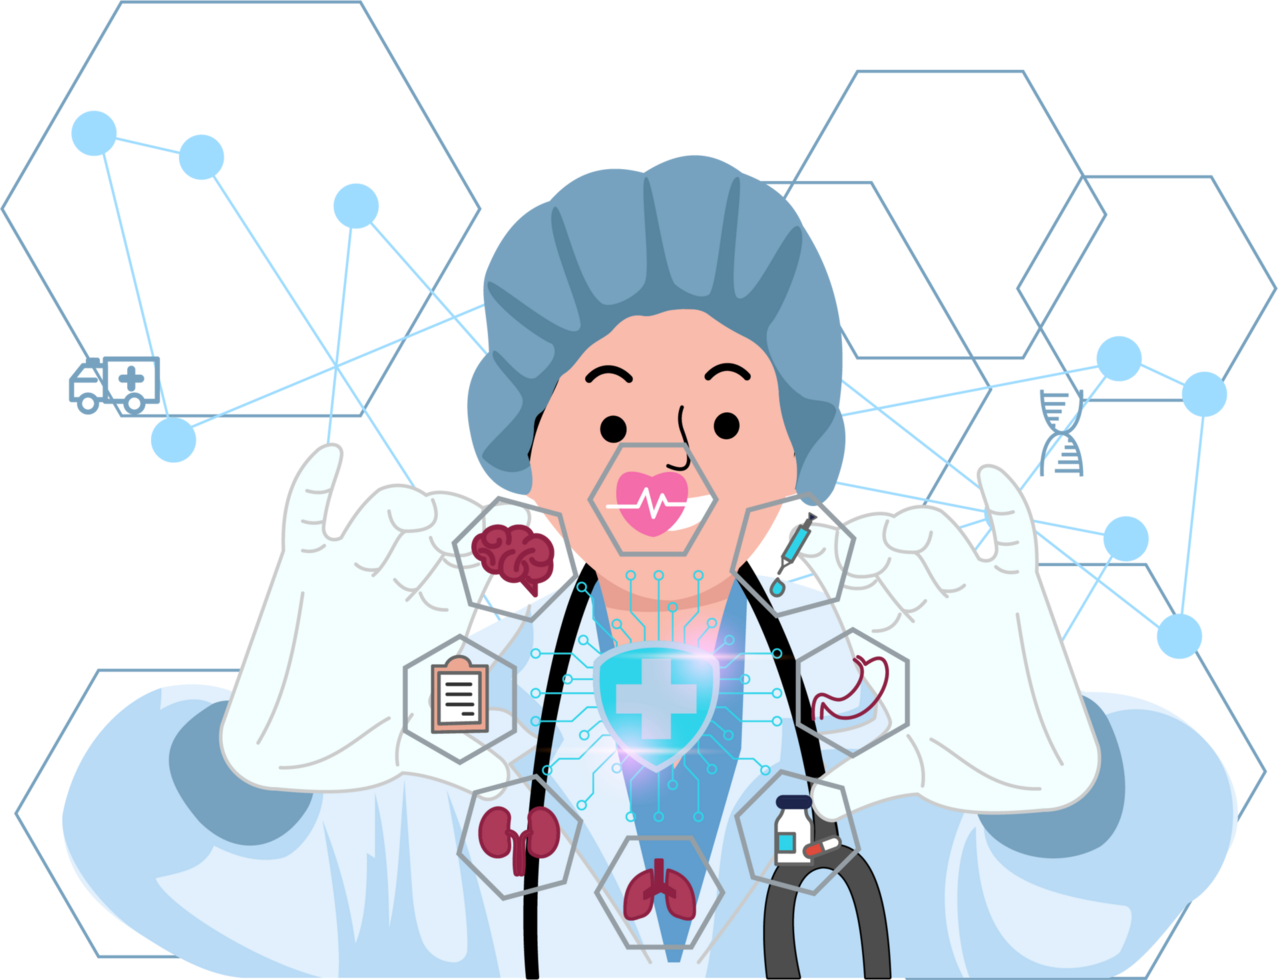 doctor touching medical icon on virtual screen png